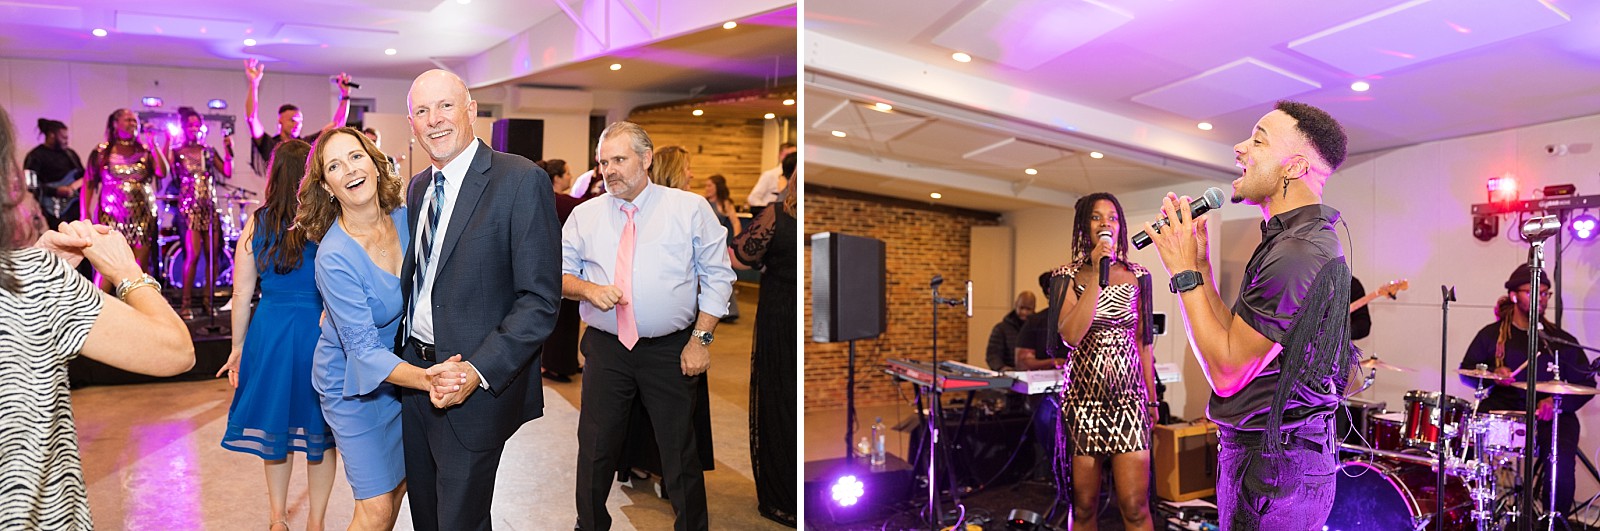 guests dancing and band performing  | The Meadows in Raleigh | Raleigh NC Wedding Photographer